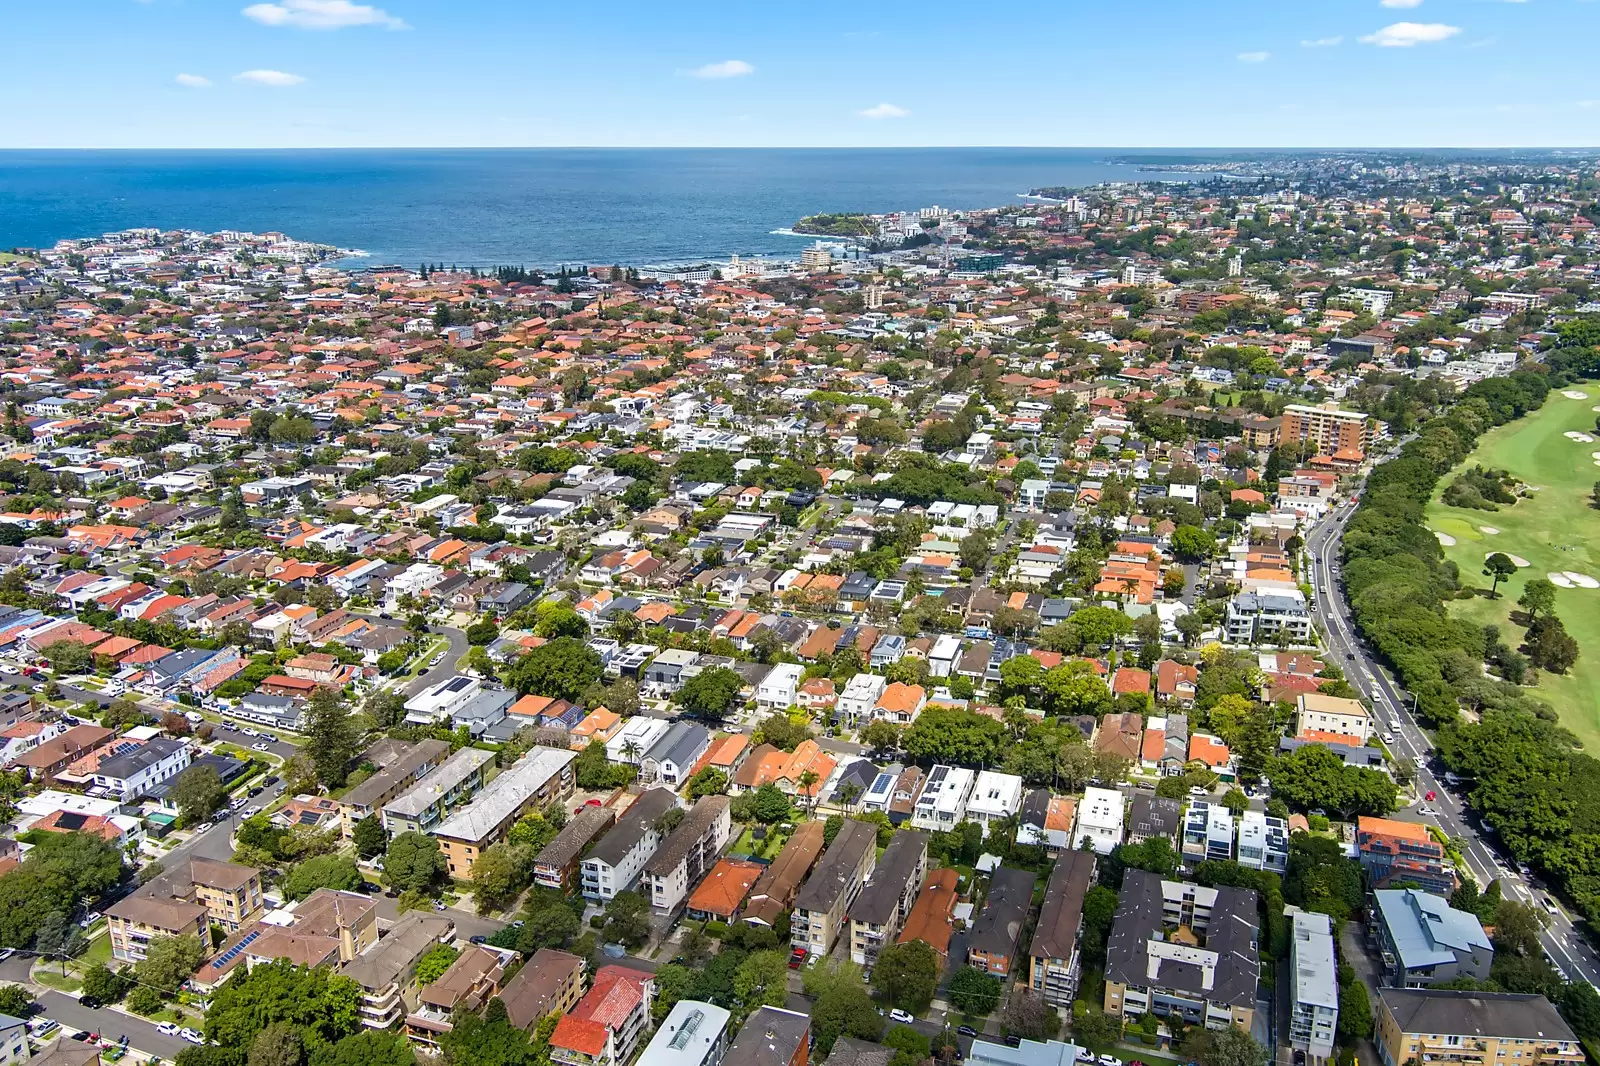 Photo #25: 23 William Street, Rose Bay - Sold by Sydney Sotheby's International Realty